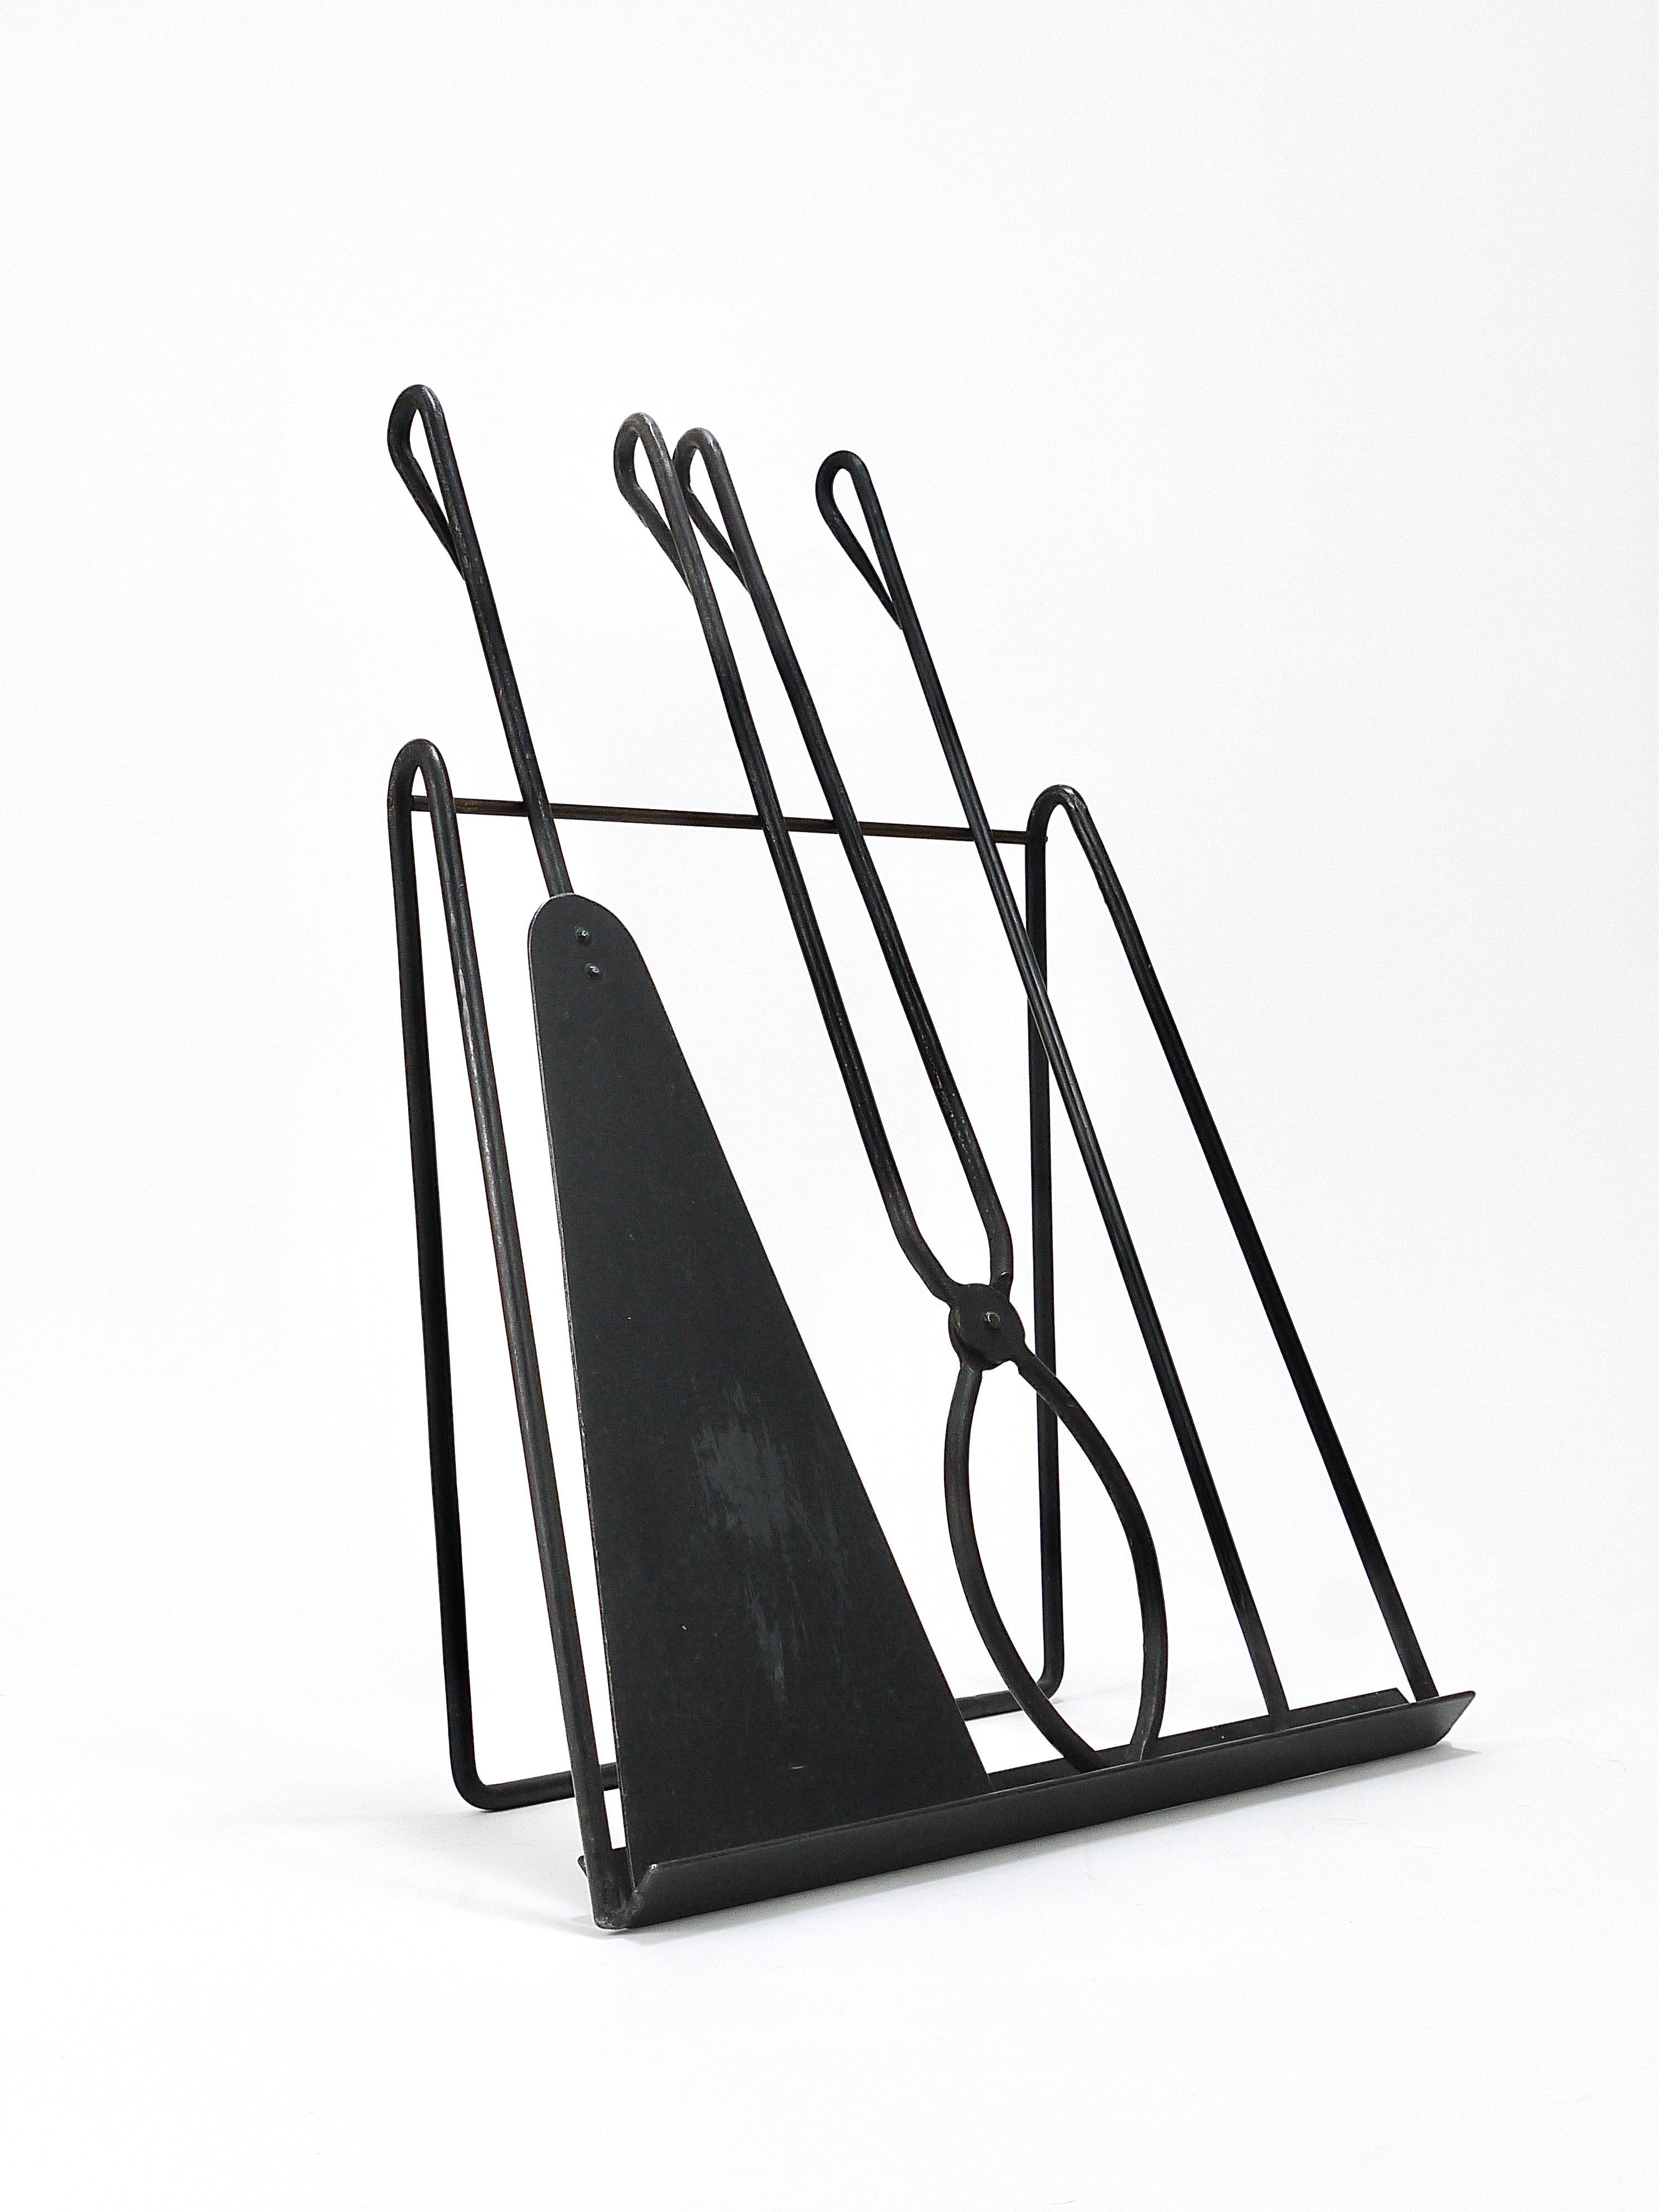 Forged Carl Auböck Fireplace Tool Set, Wrought Iron, Austria, 1940s